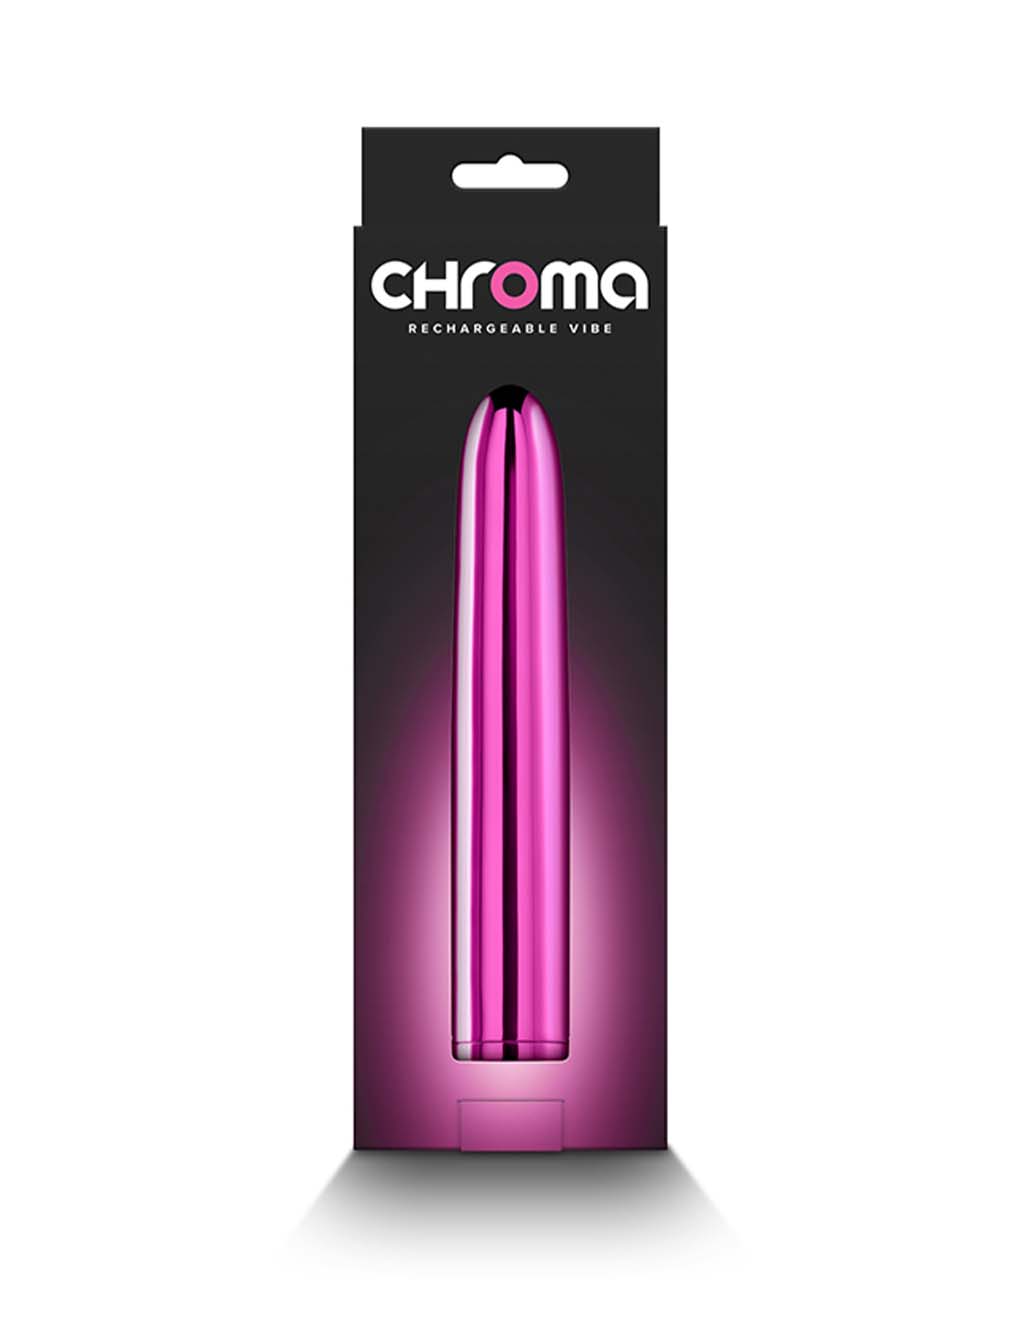 Chroma Standard Vibe Rechargeable- Box Back